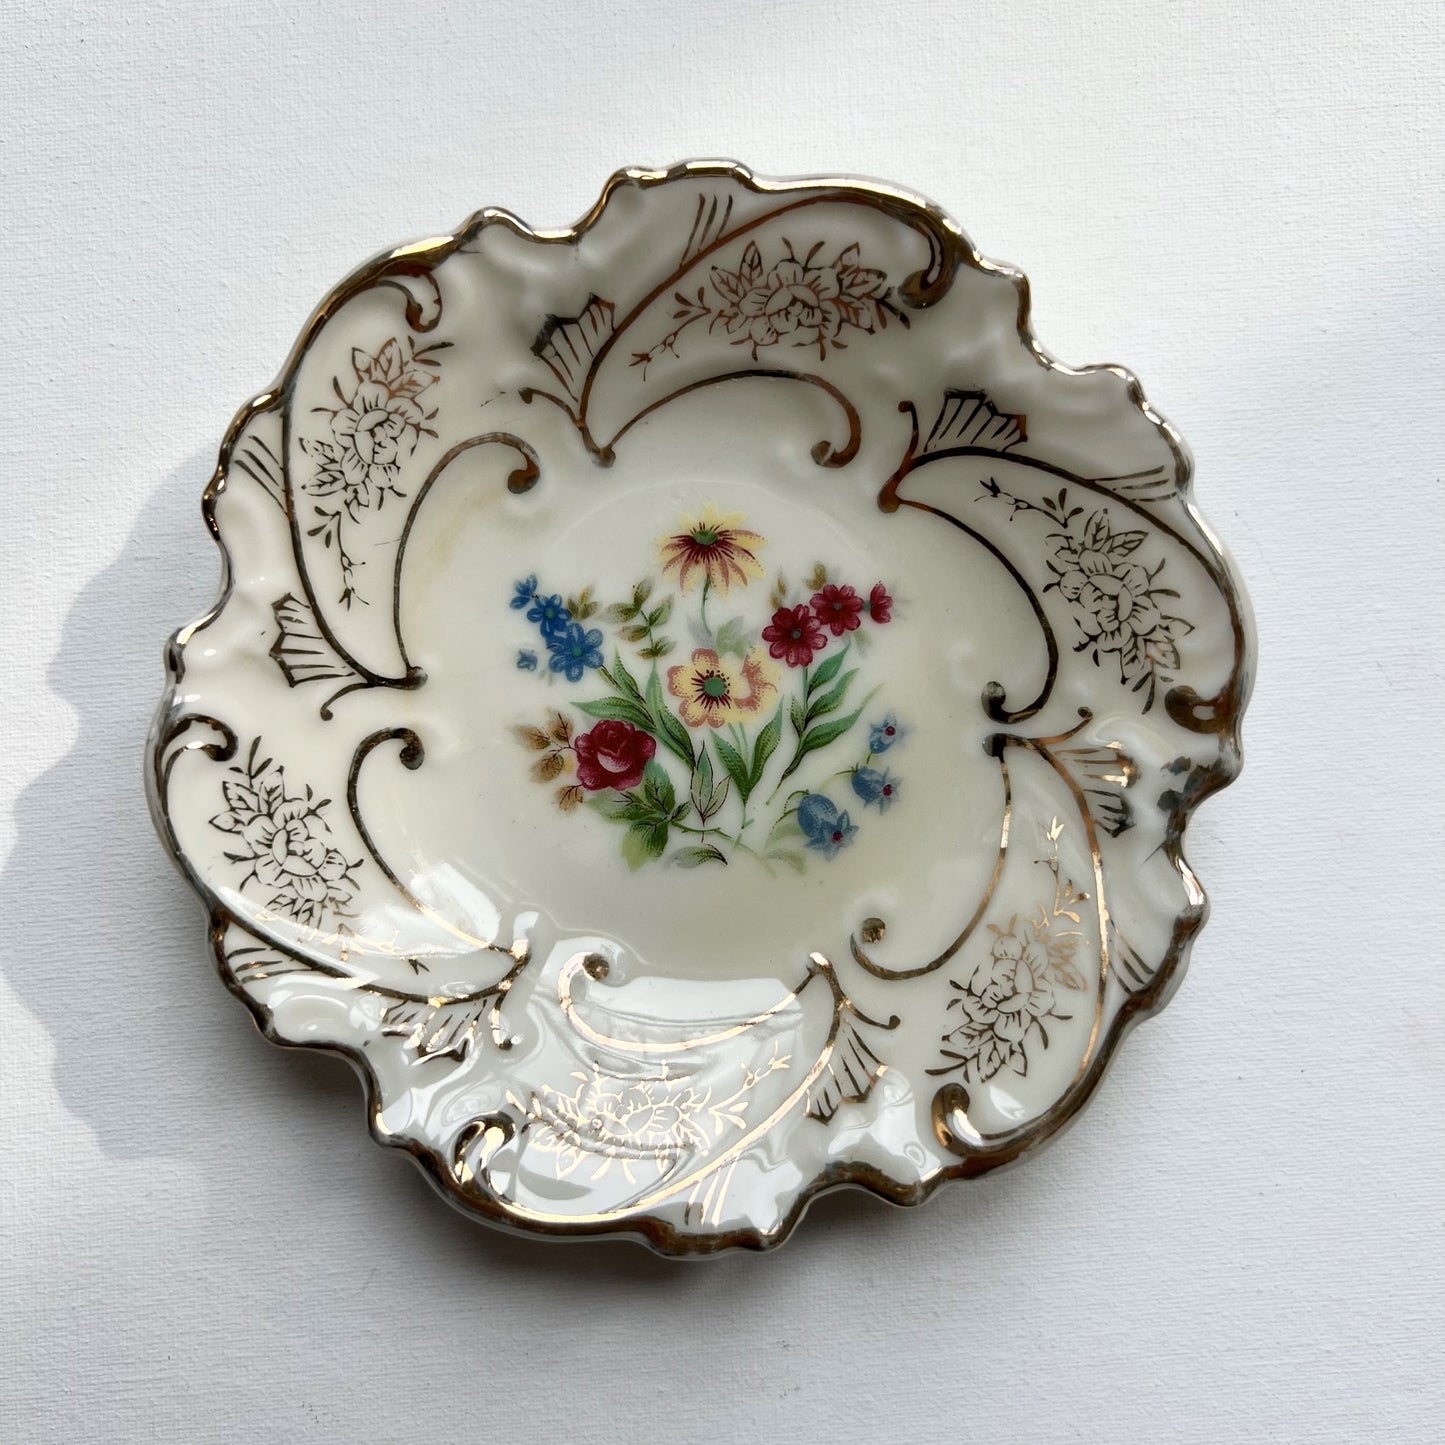 【Vintage】Germany ‐ 1940s Small Flower Plate